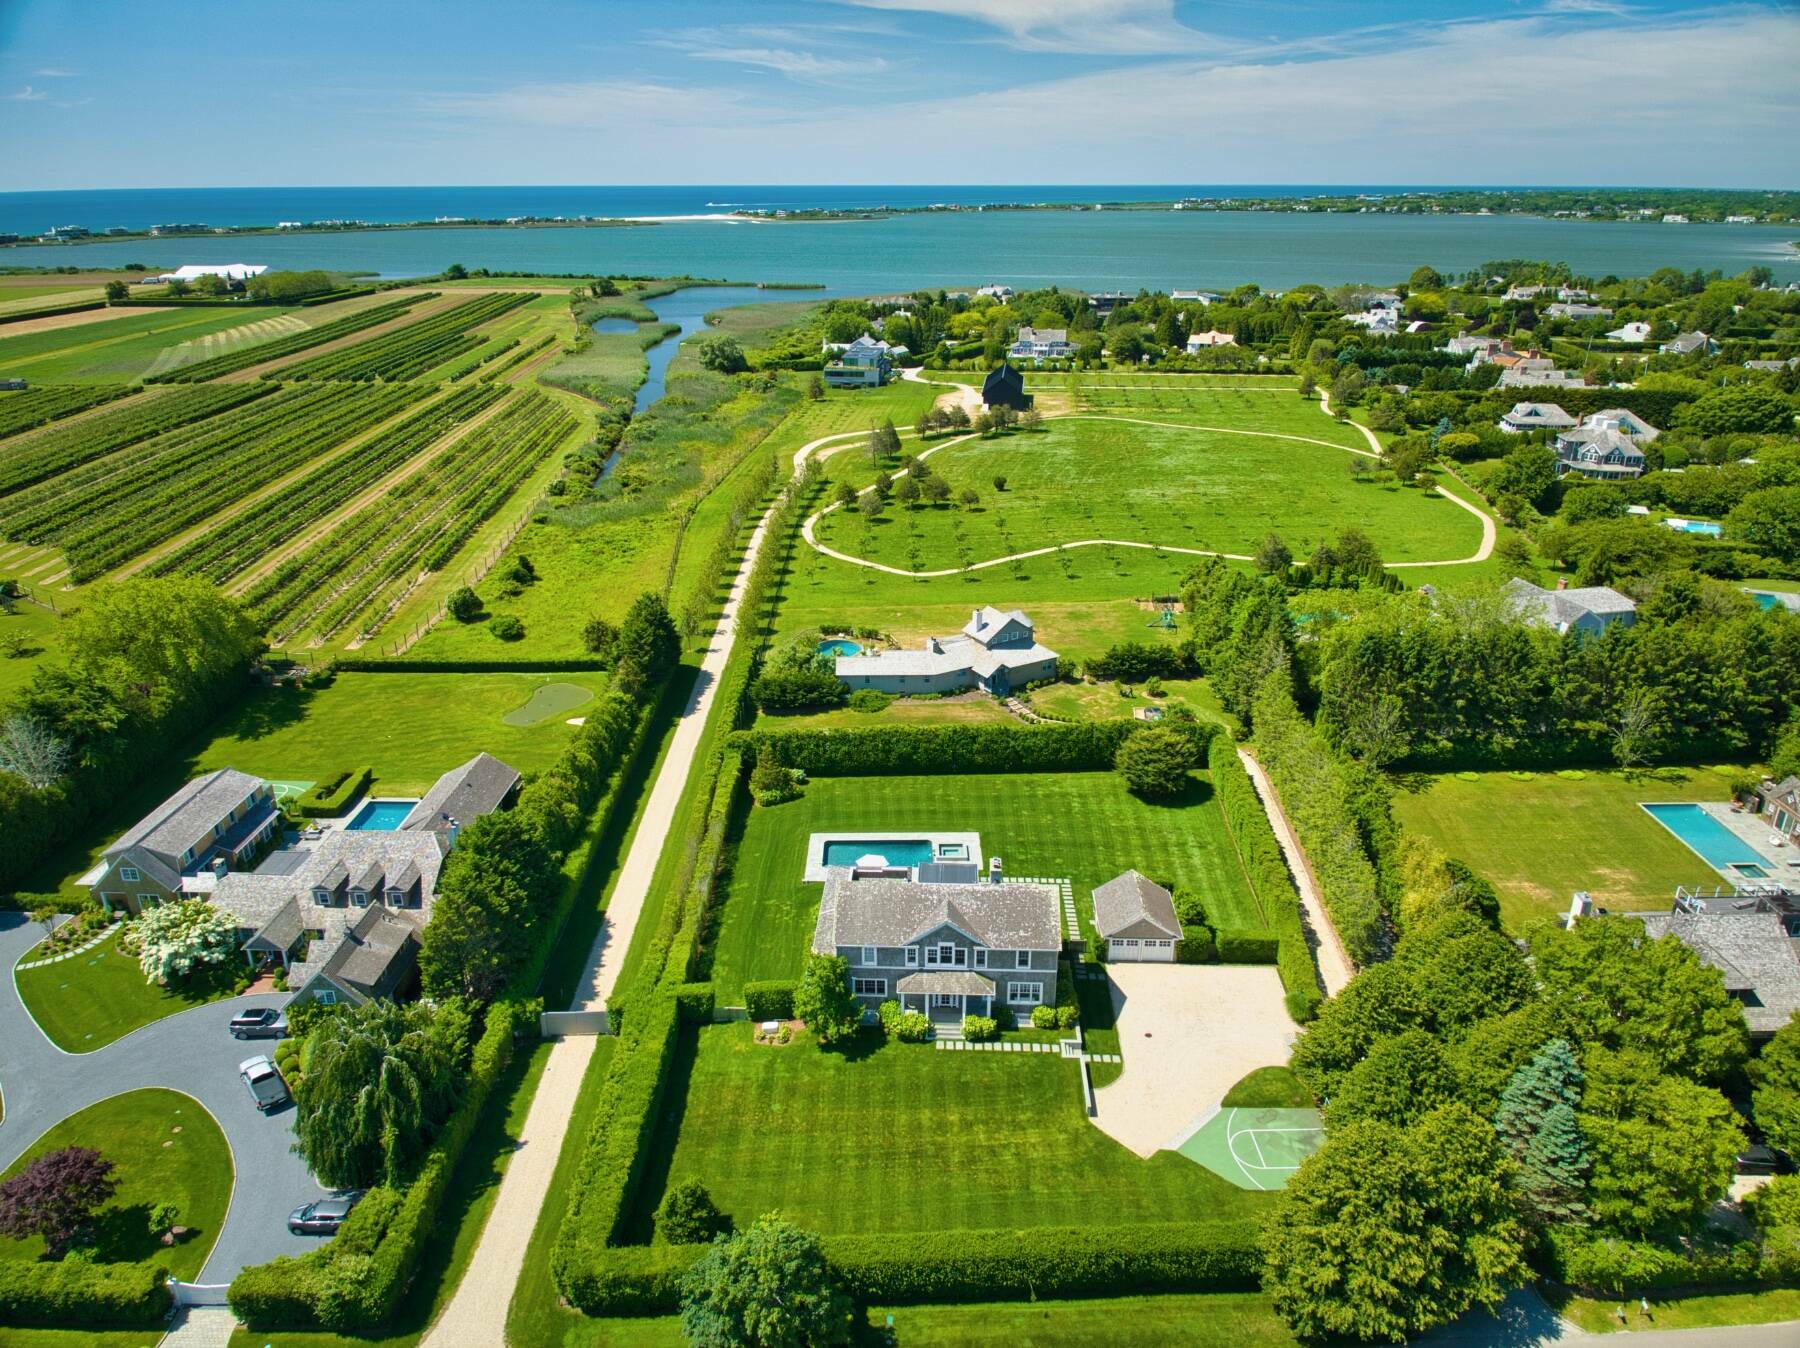 31 Mecox Bay Lane in Water Mill sold for $7.6 million. AERIAL HAMPTONS/COURTESY SOTHEBY'S INTERNATIONAL REALTY